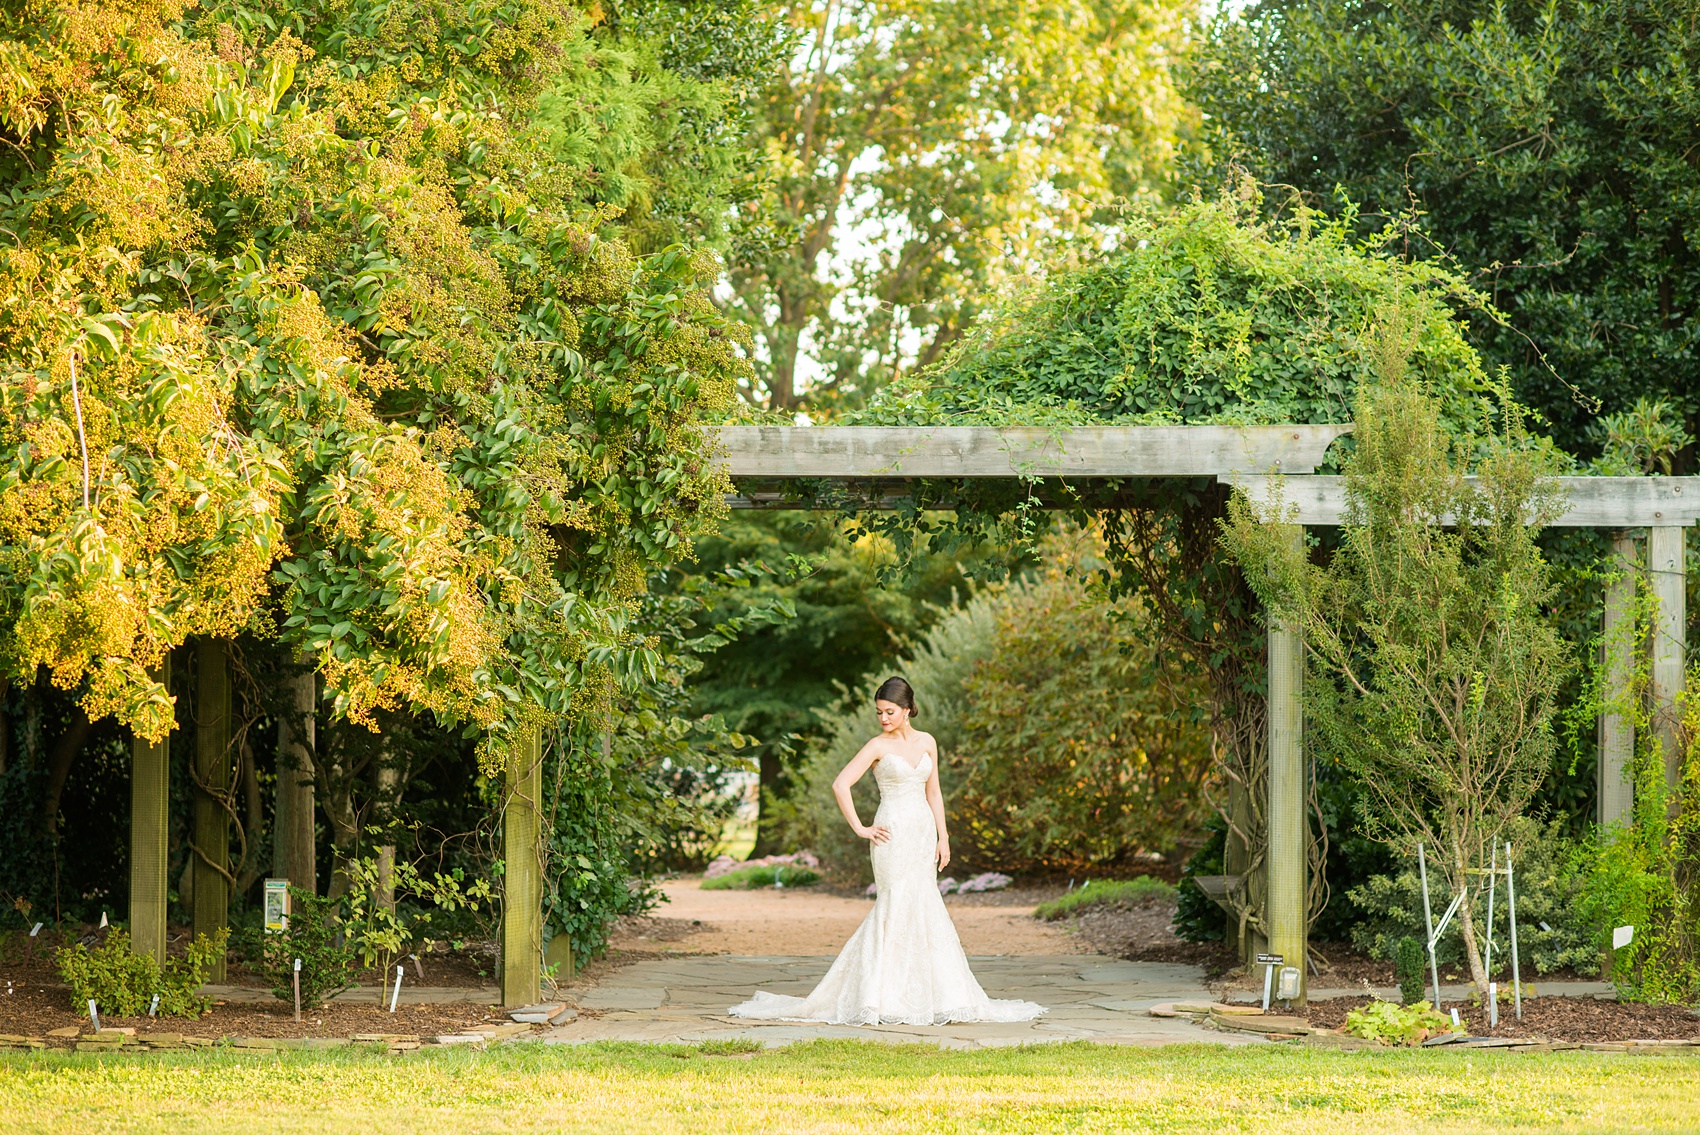 Mikkel Paige Photography photos from a bridal session at Raleigh's JC Raulston Arboretum on North Carolina's NC State campus. Picture of the bride in the garden.